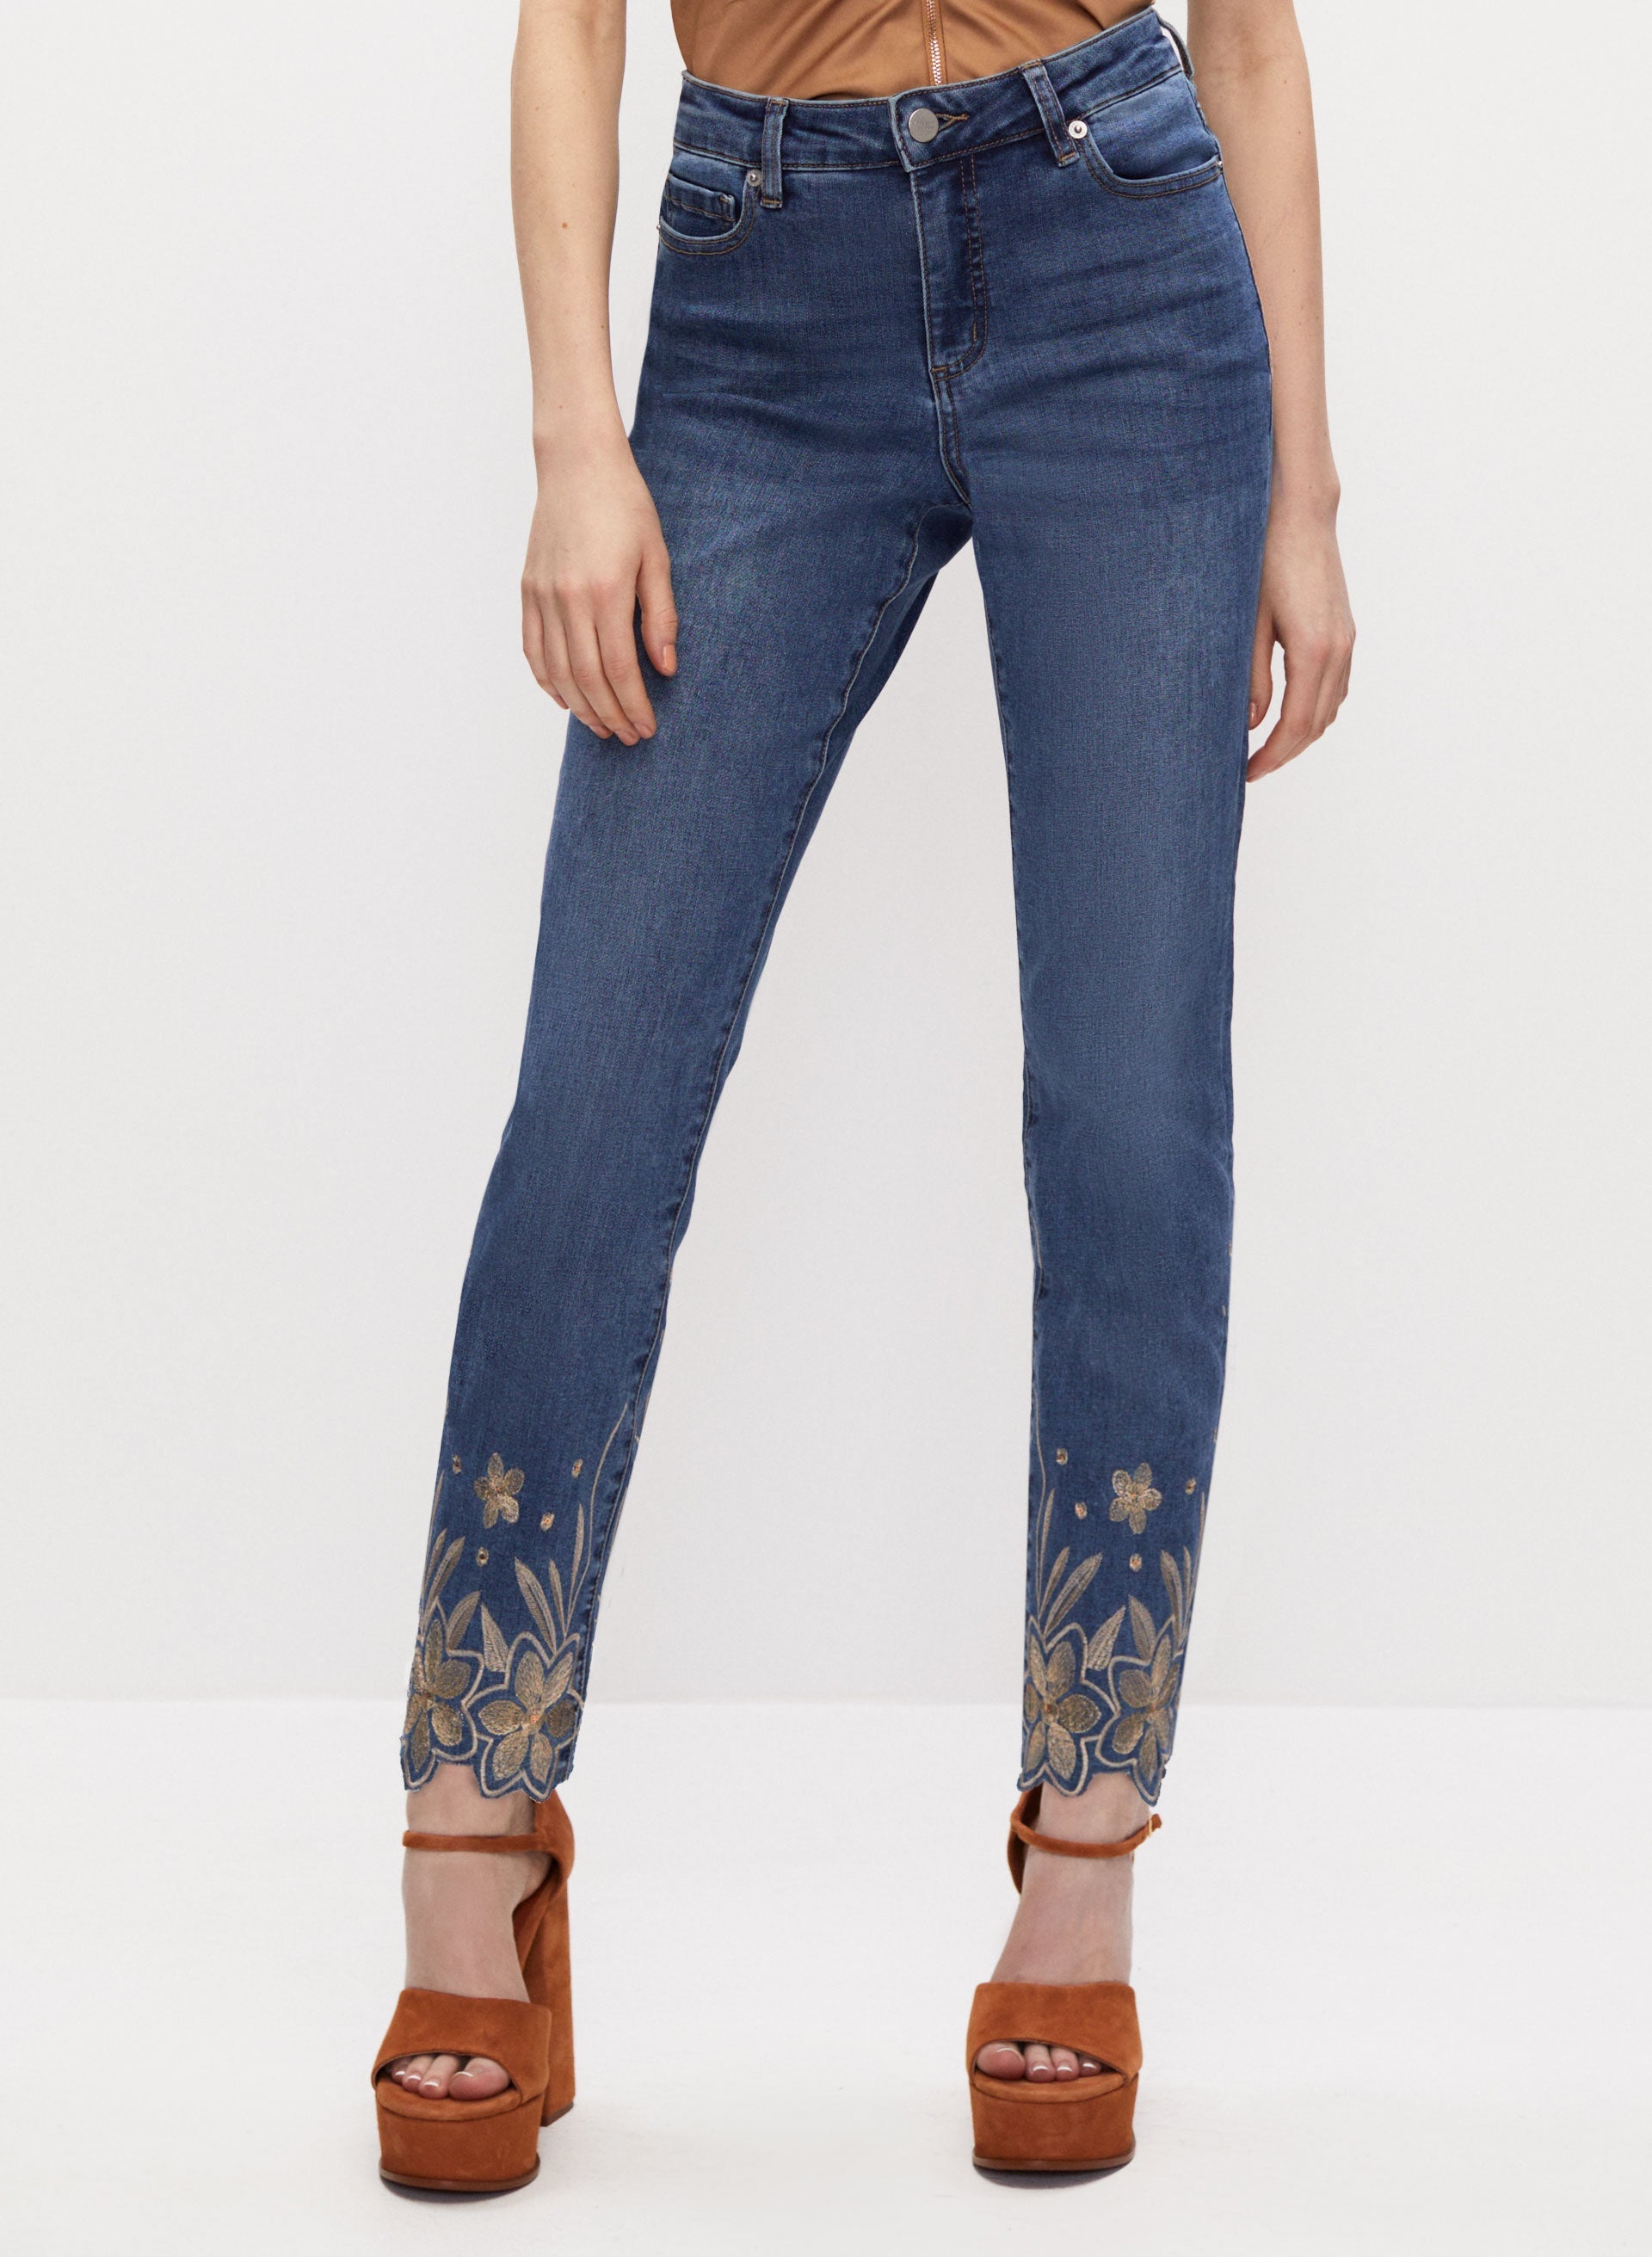 Embroidered Detail Jeans